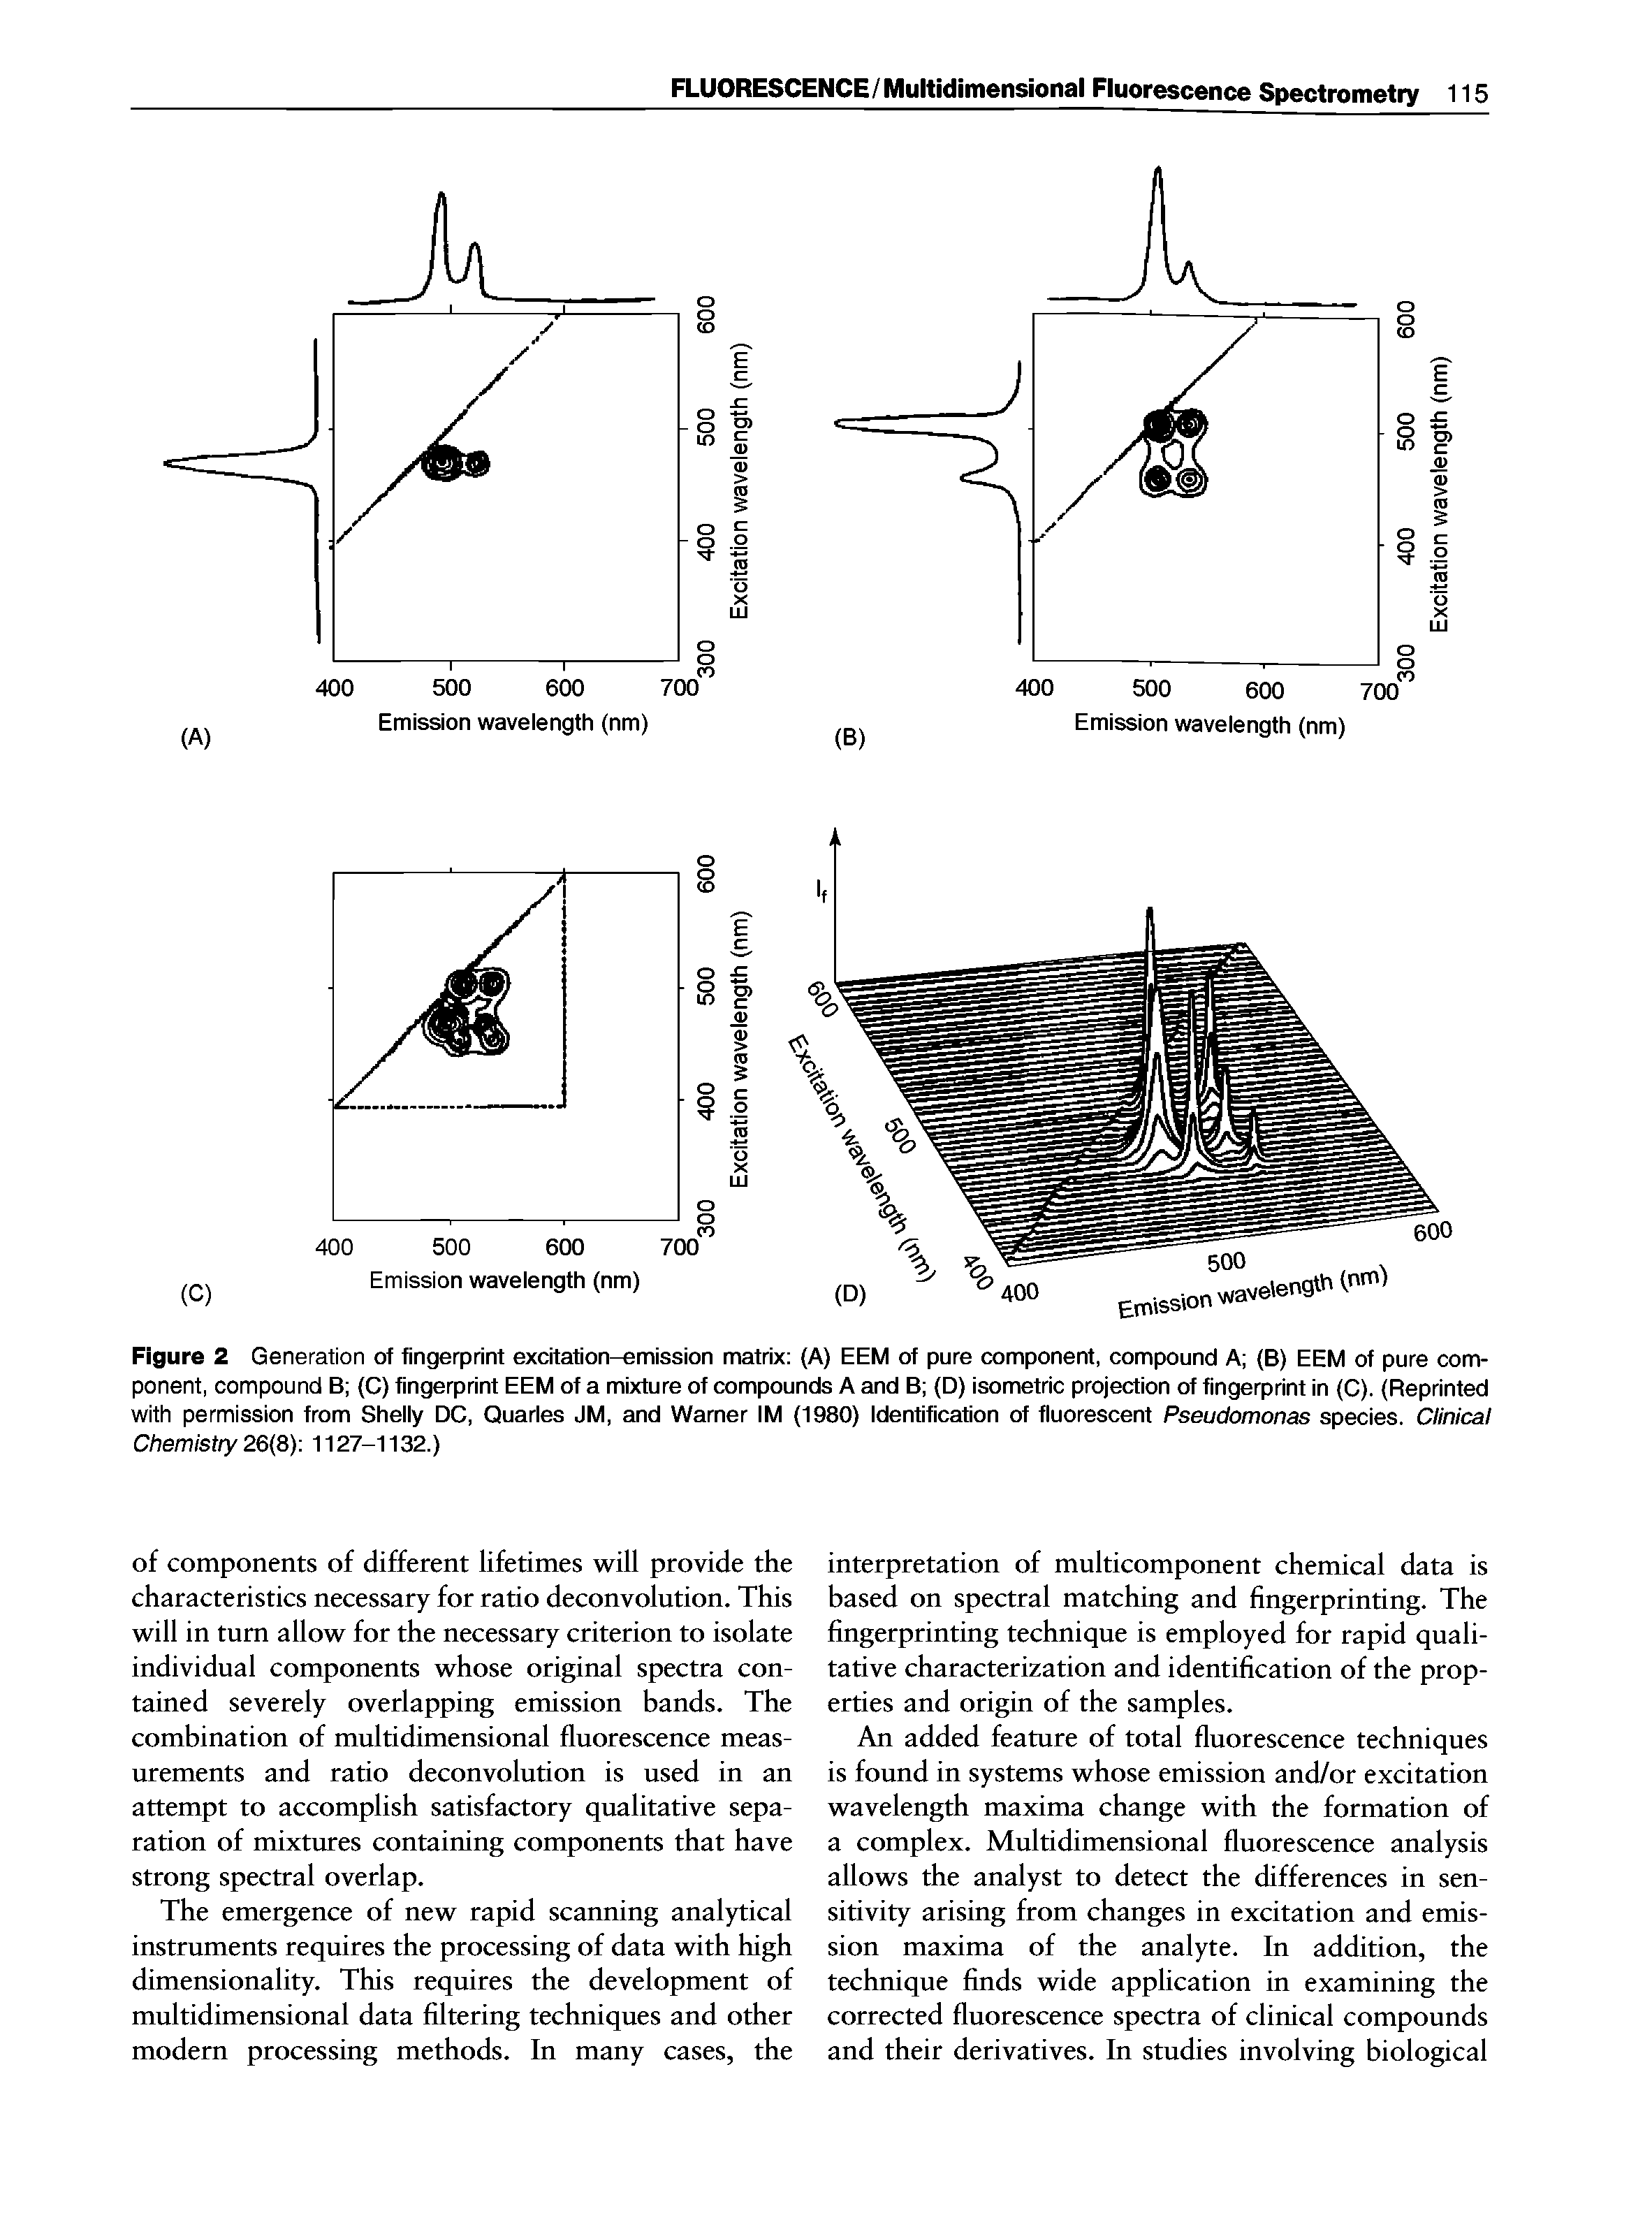 Figure 2 Generation of fingerprint excitation-emission matrix (A) EEM of pure component, compound A (B) EEM of pure component, compound B (C) fingerprint EEM of a mixture of compounds A and B (D) isometric projection of fingerprint in (C). (Reprinted with permission from Shelly DC, Quarles JM, and Warner IM (1980) Identification of fluorescent Pseudomonas species. Clinical Chemistry 26 8y. 1127-1132.)...